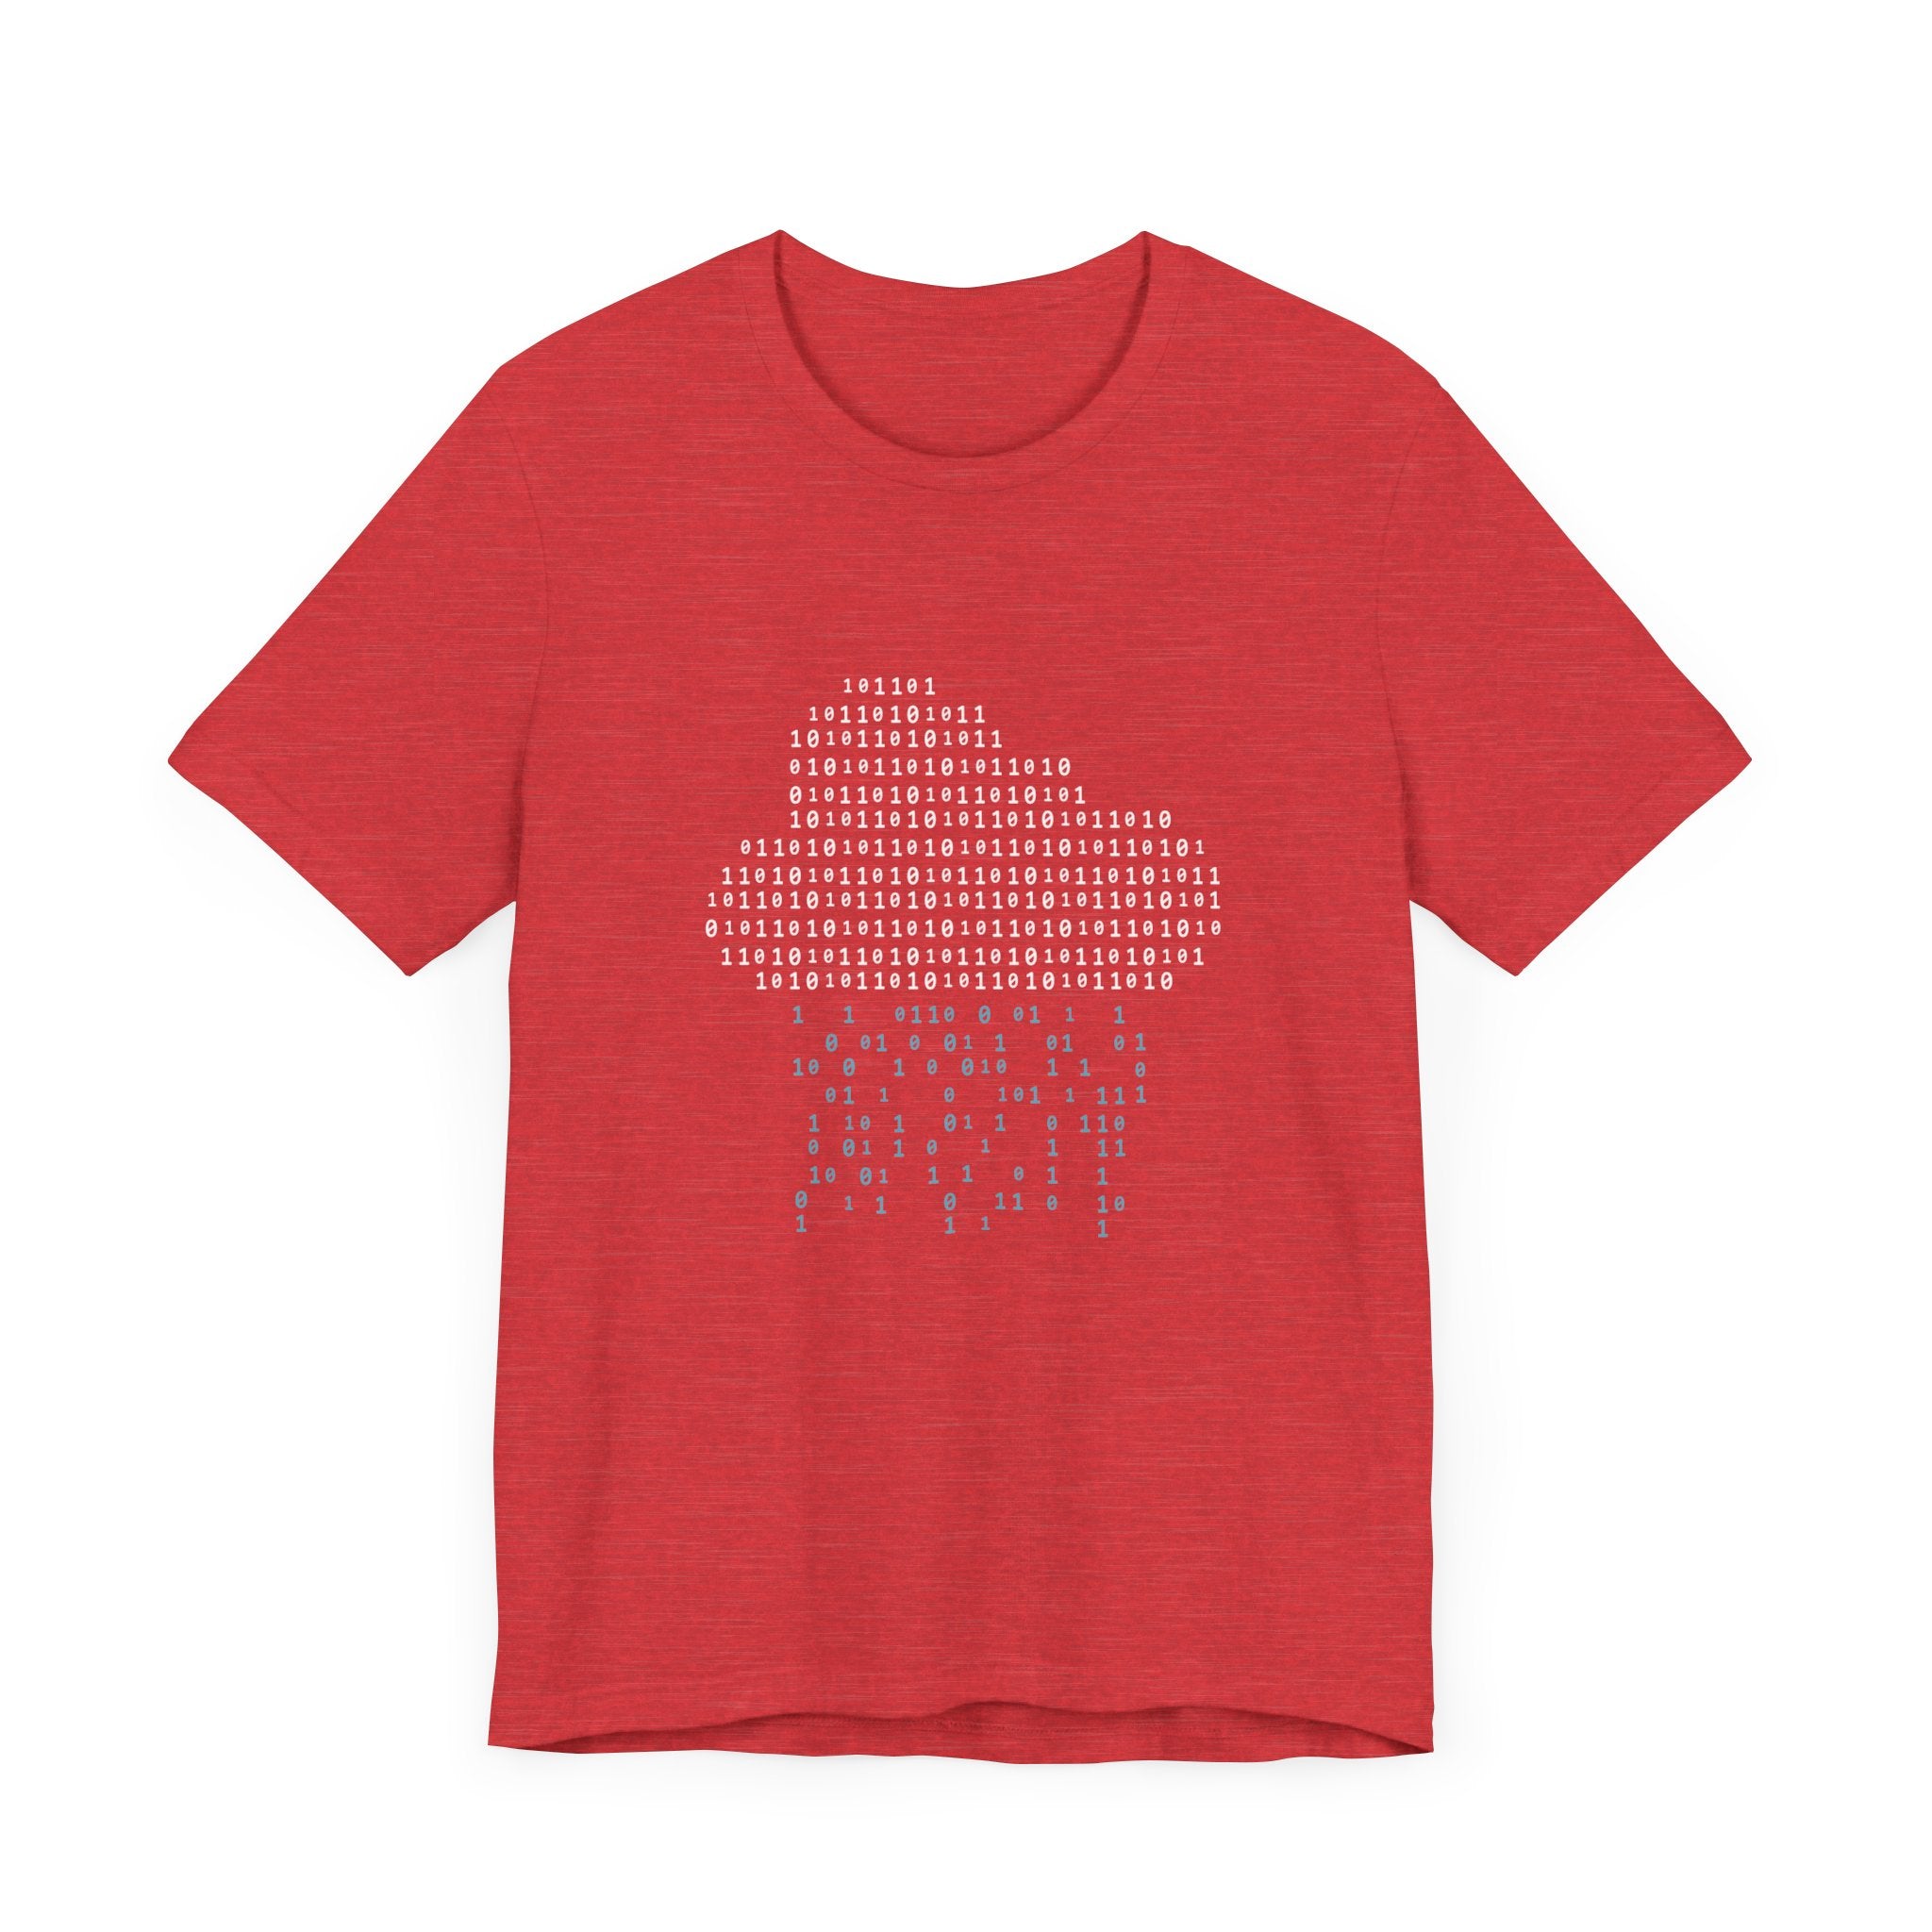 A red T-shirt featuring an image of a jellyfish composed of binary code, crafted from Airlume combed and ring-spun cotton for ultimate comfort. This unique Binary Rain Cloud - T-Shirt combines tech-inspired design with top-quality fabric.